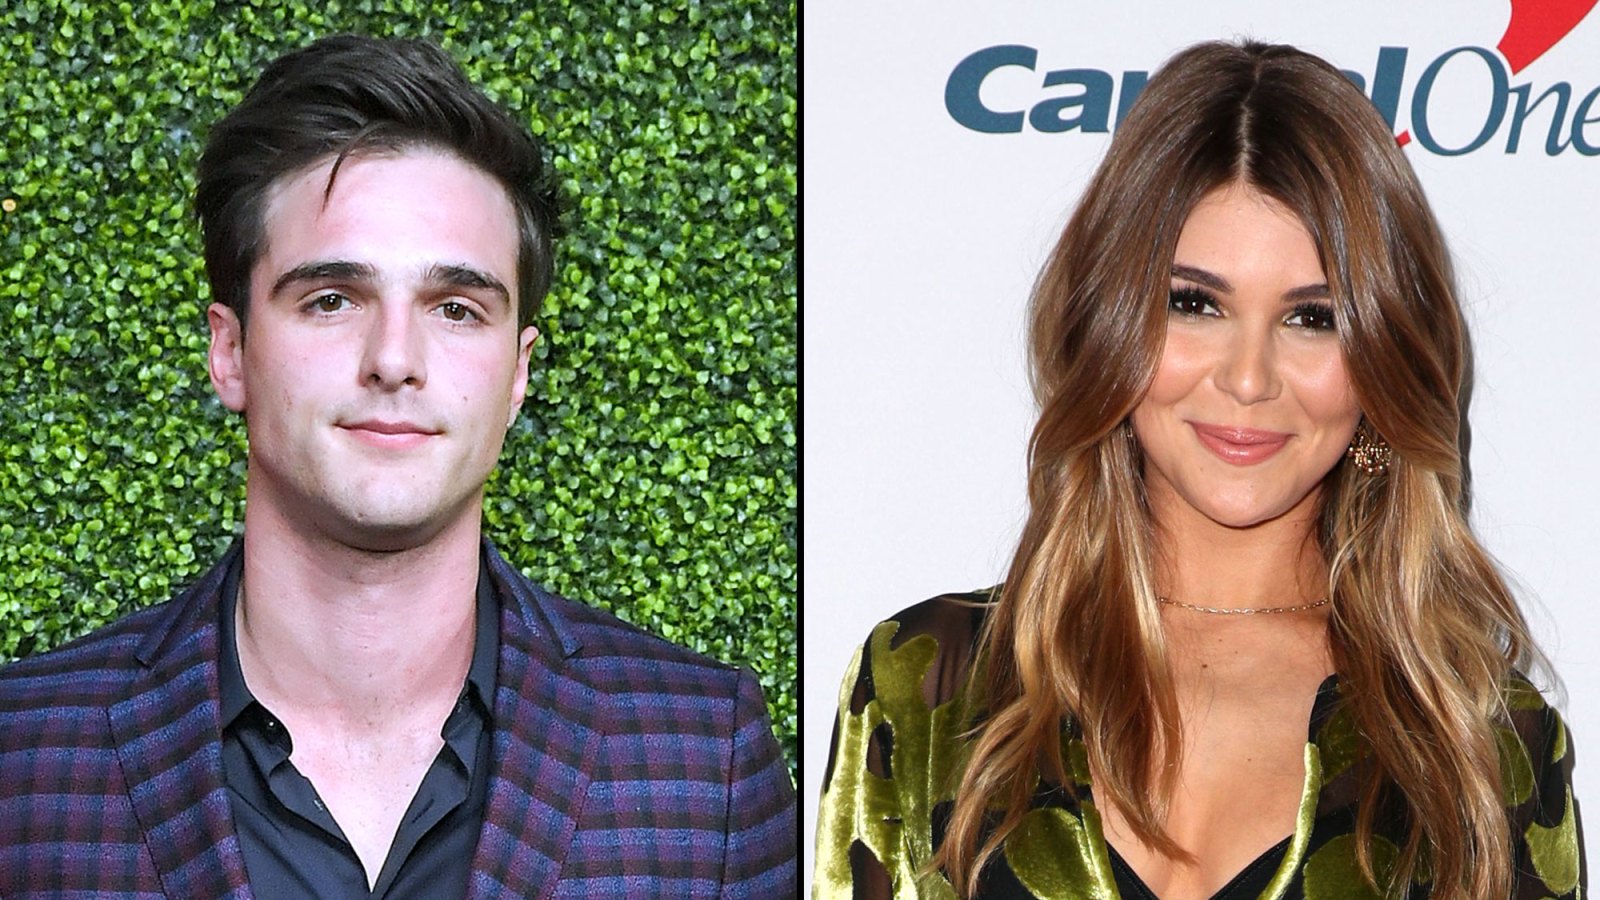 Jacob Elordi Spotted With Olivia Jade Giannulli 1 Month After His Split From Kaia Gerber